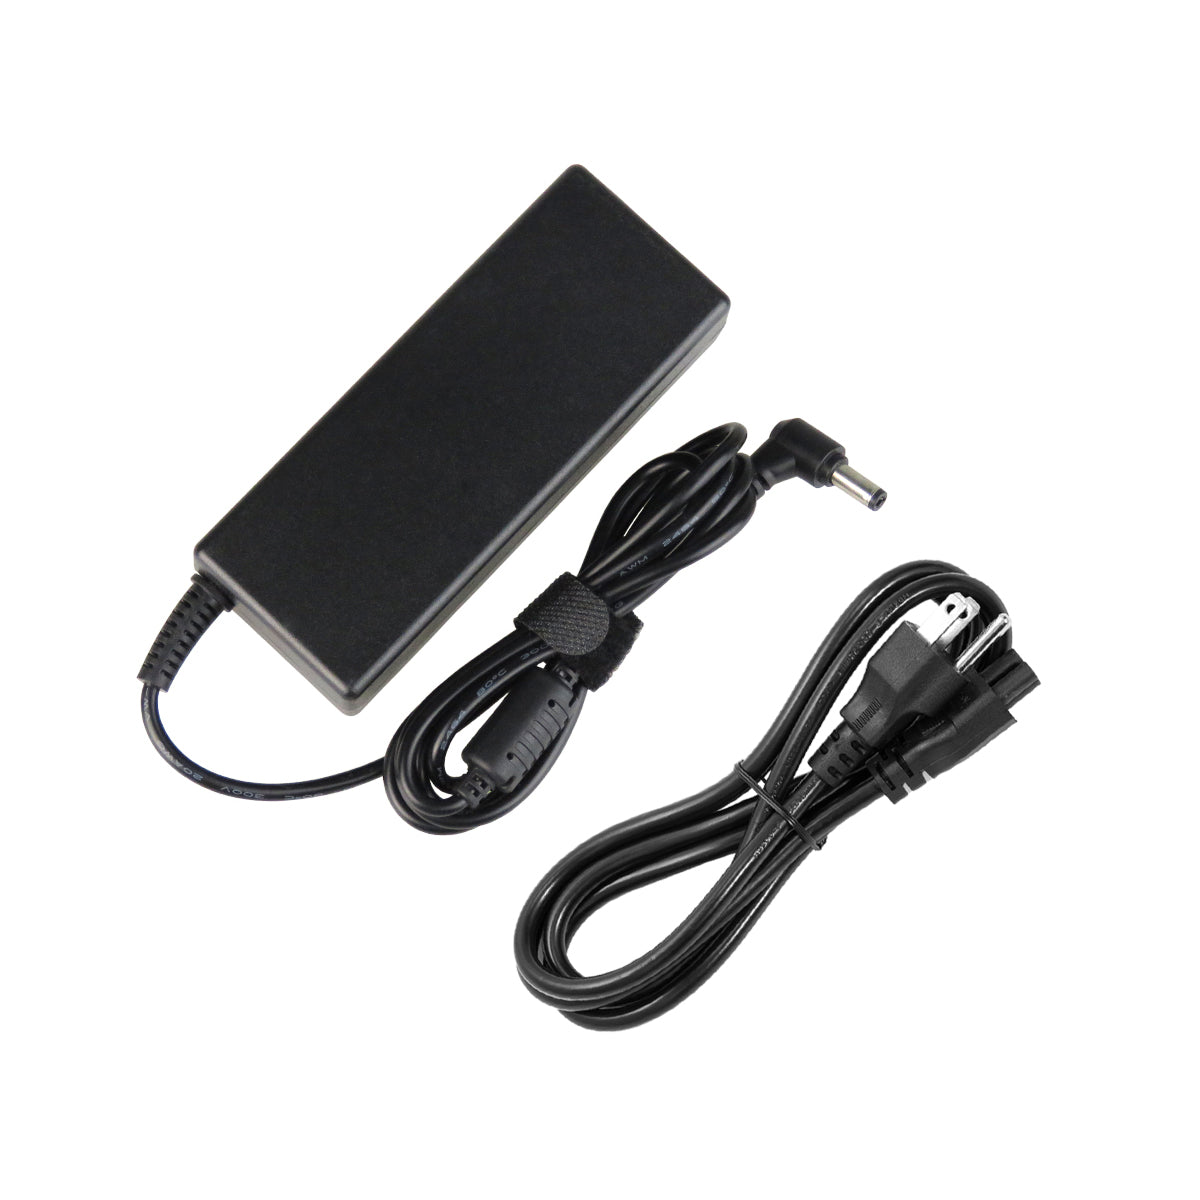 AC Adapter Charger for ASUS X54L-SX044D Notebook.